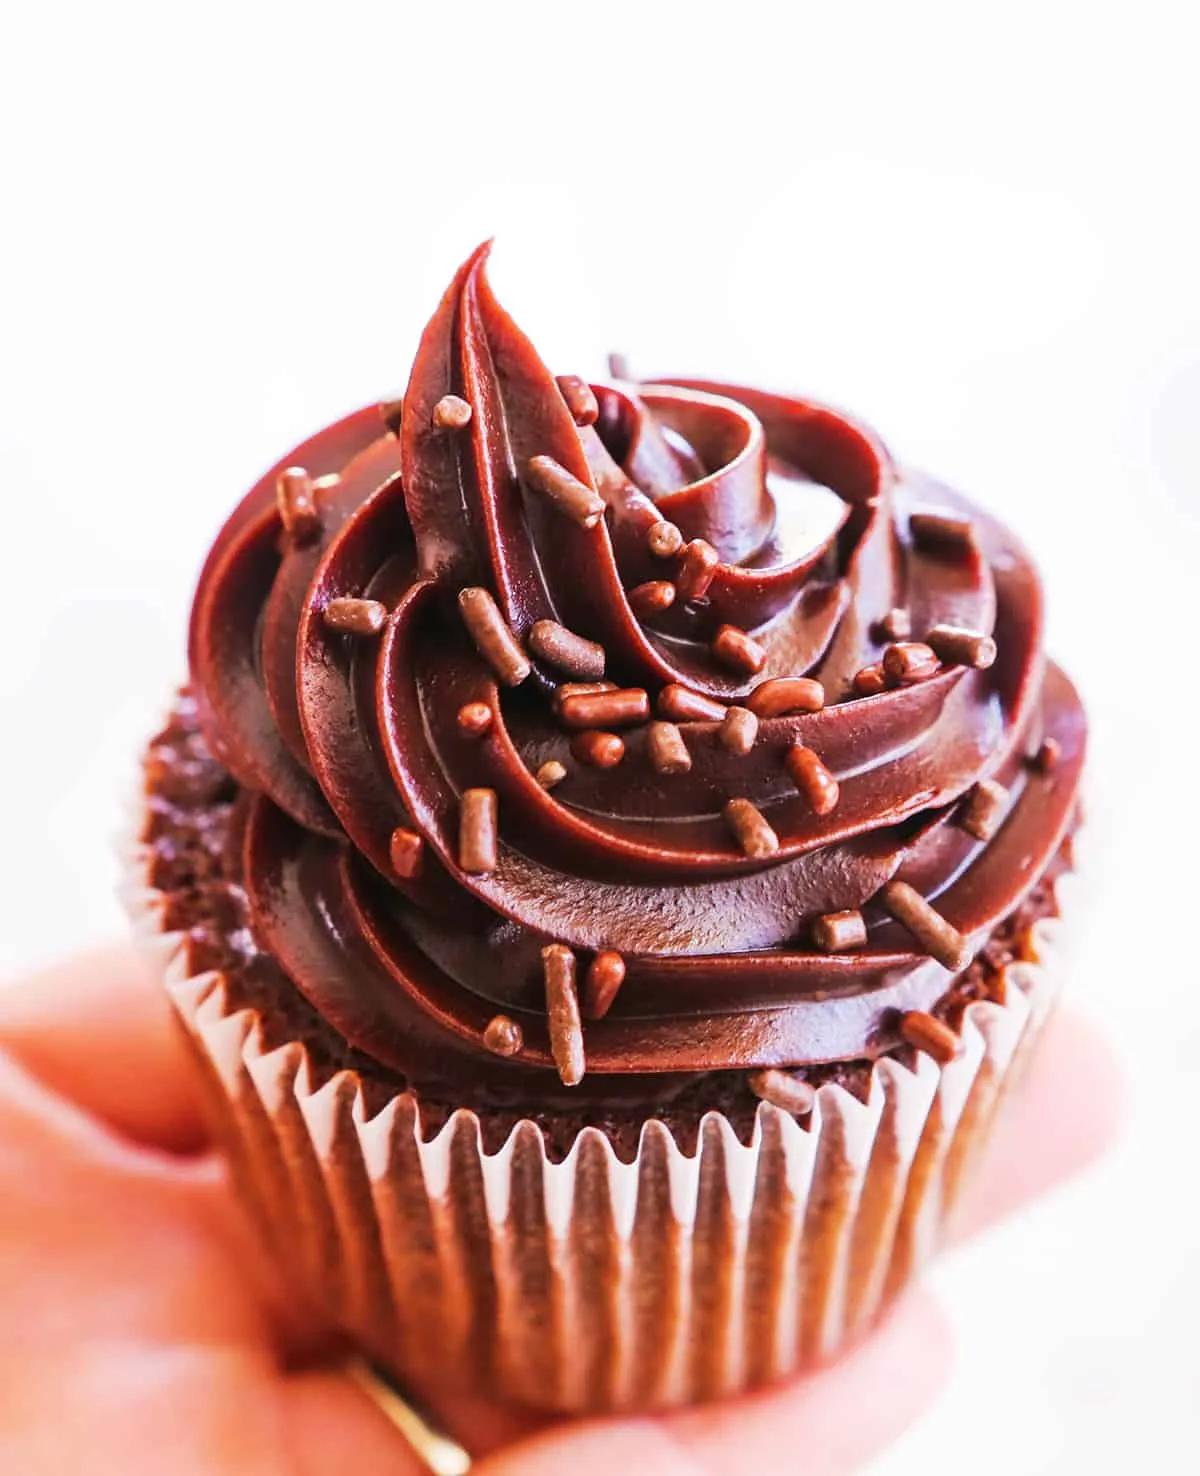 Ganache Frosting Recipe - Chocolate HEAVEN! - Pip and Ebby